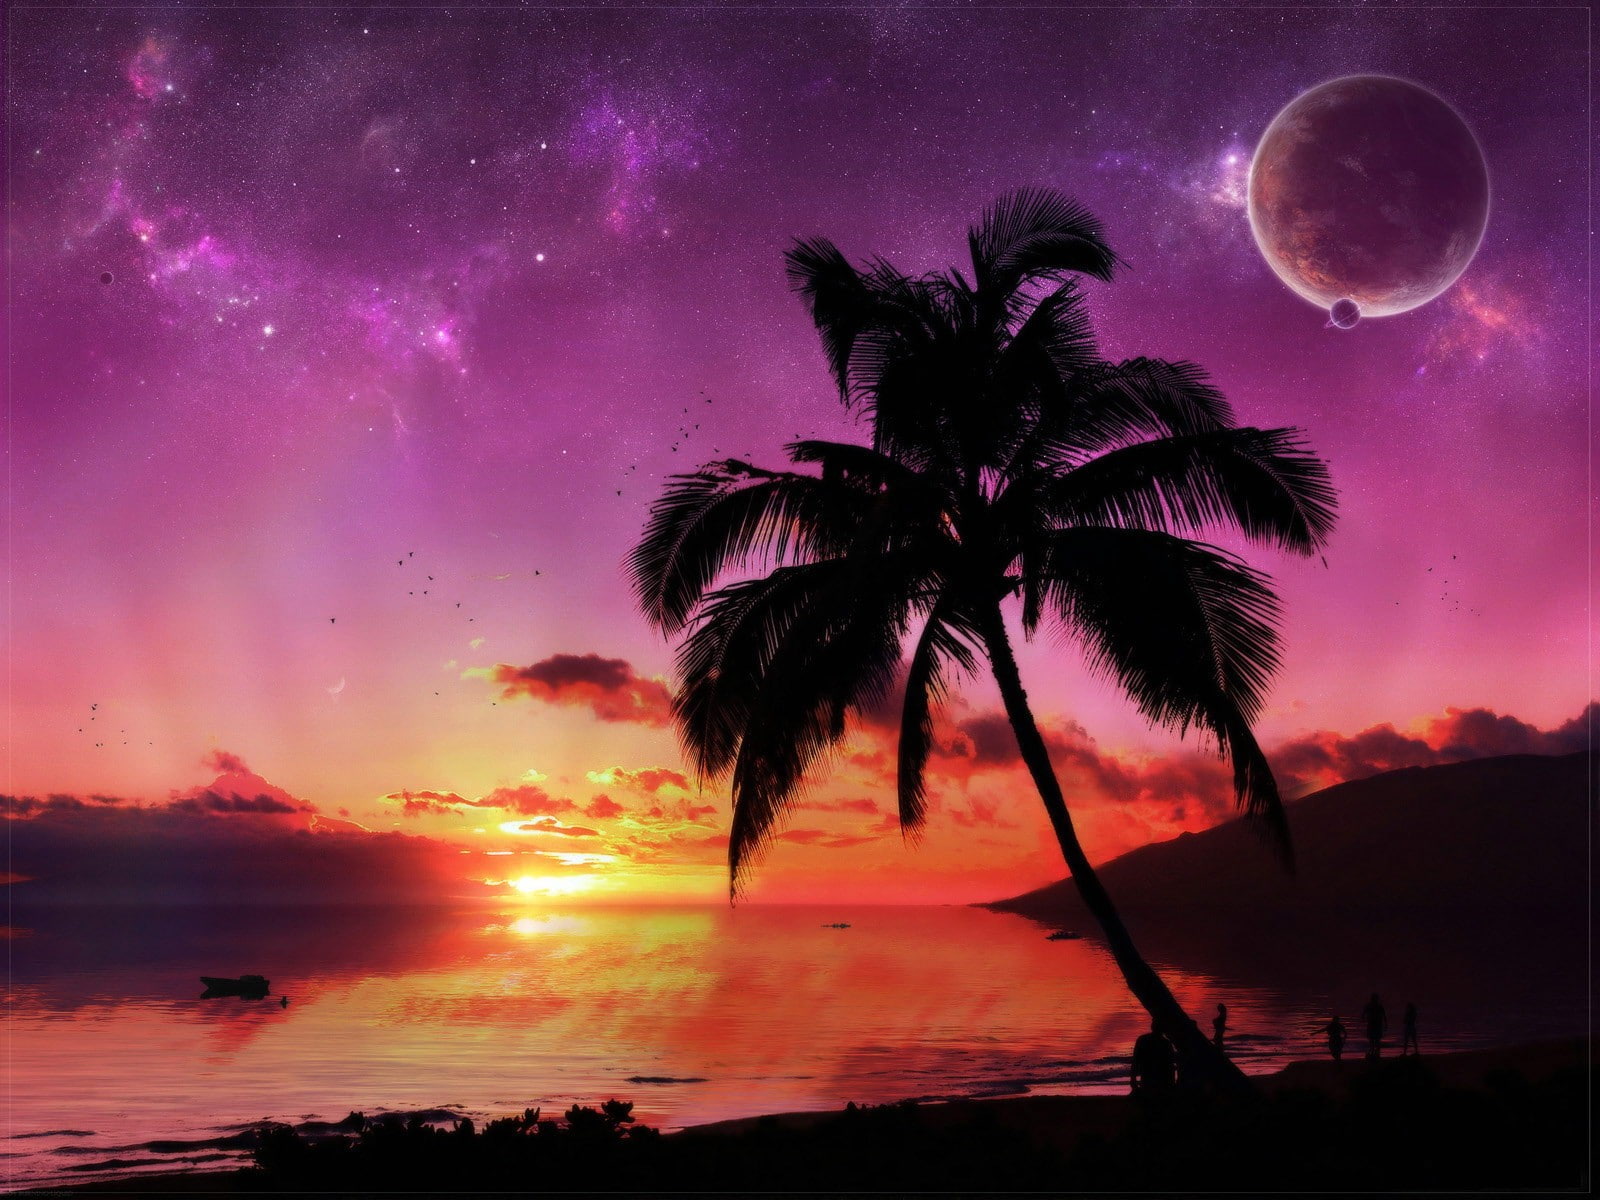 palm tree and moon, sunset, planet, Palma, sky, tropical climate